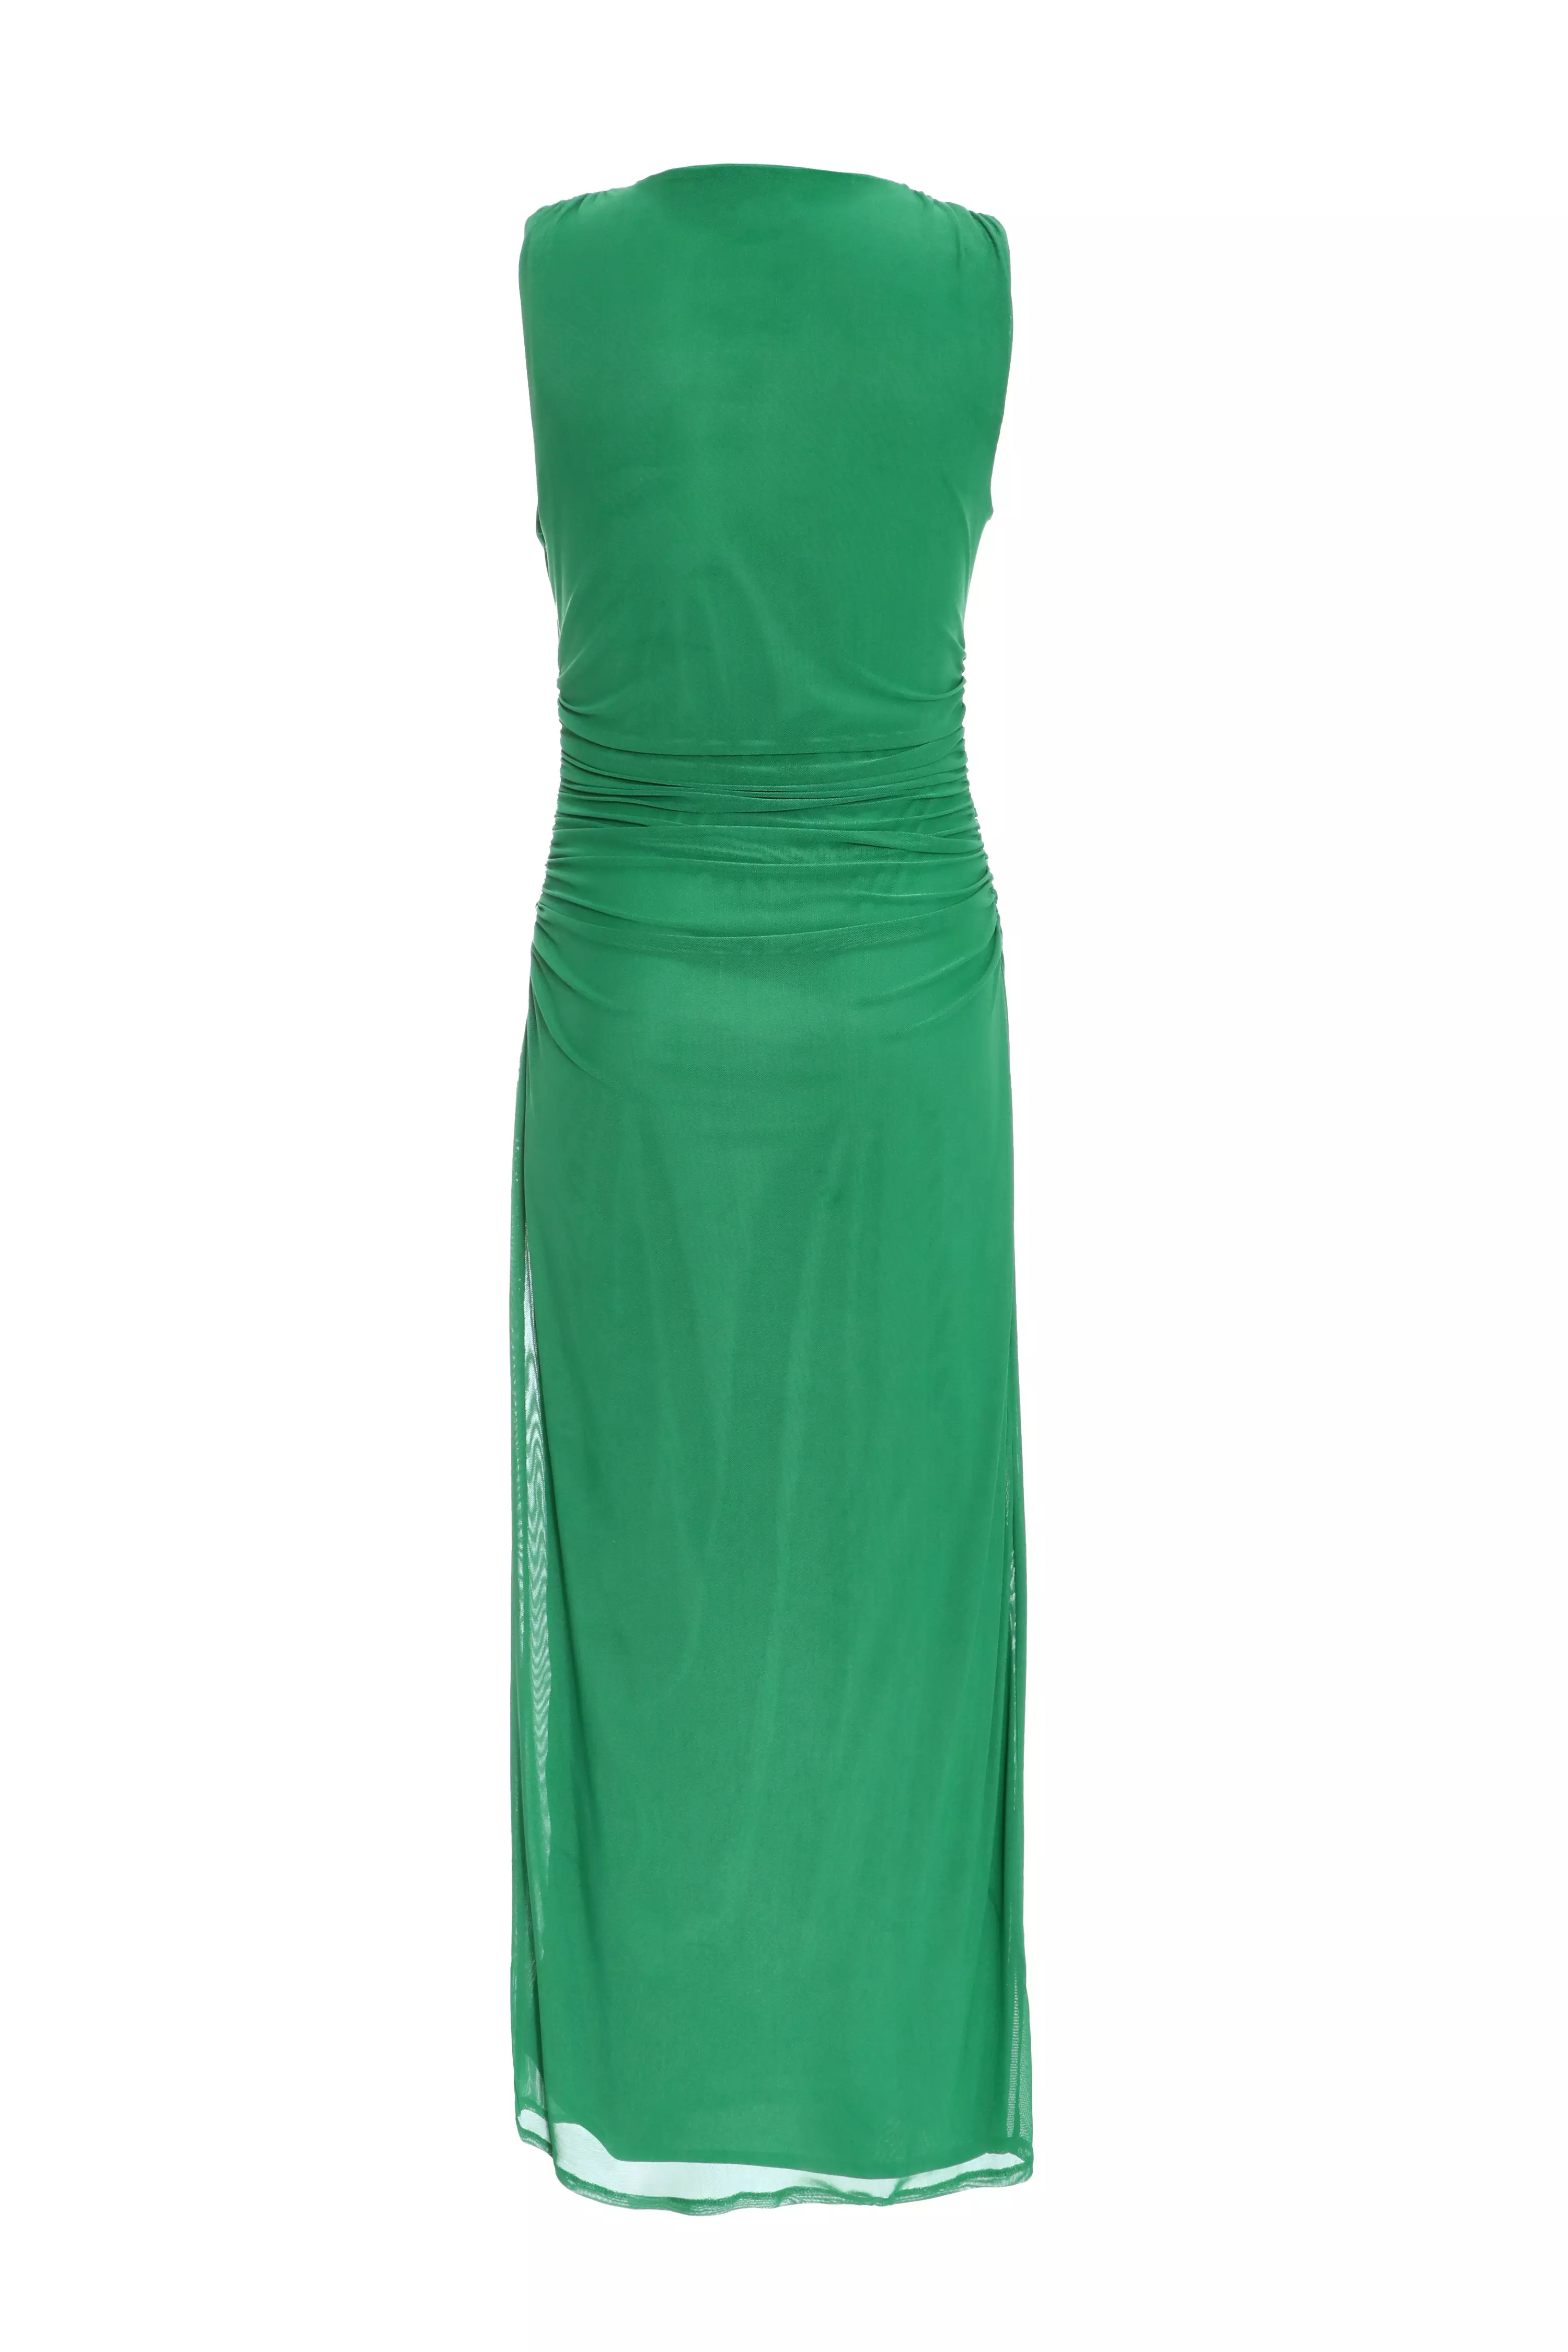 Green Mesh Ruched Bodycon Midaxi Dress